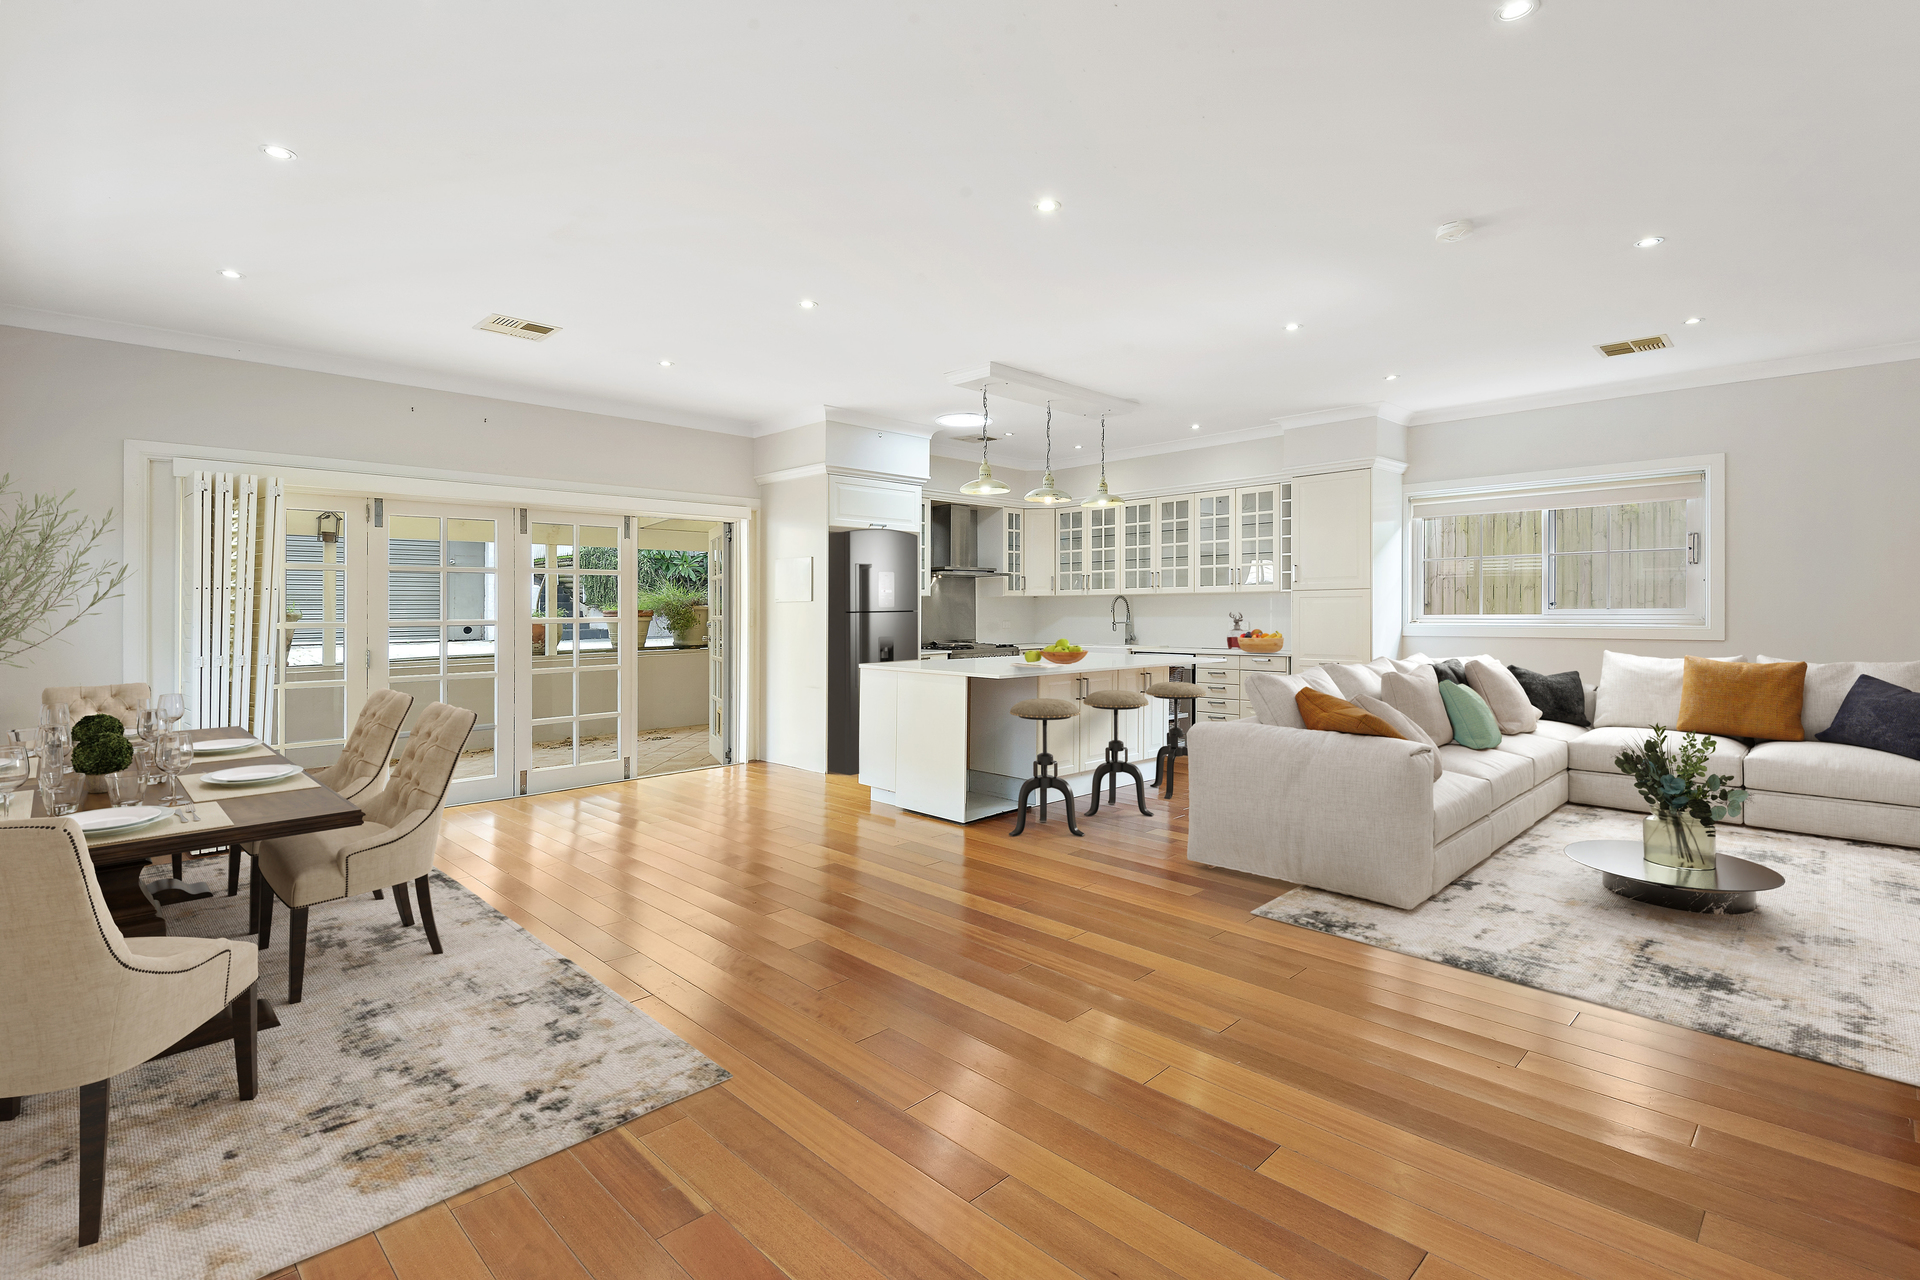 Leased House 35 King Street, Manly Vale NSW 2093 - Mar 13, 2023 - Homely